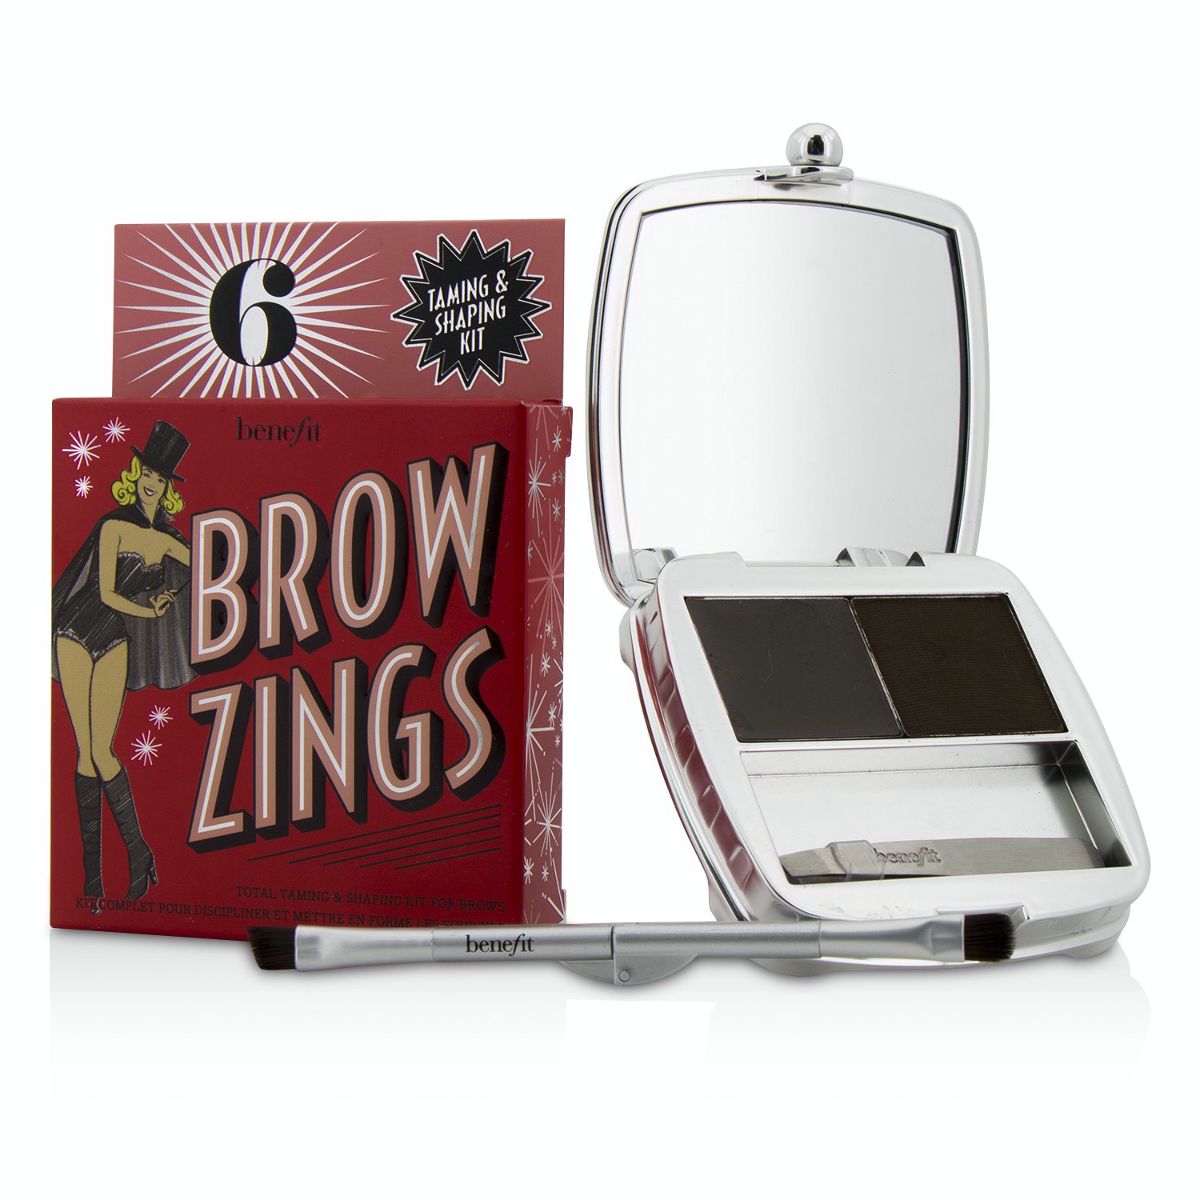 Brow Zings (Total Taming  Shaping Kit For Brows) - #6 (Deep) Benefit Image